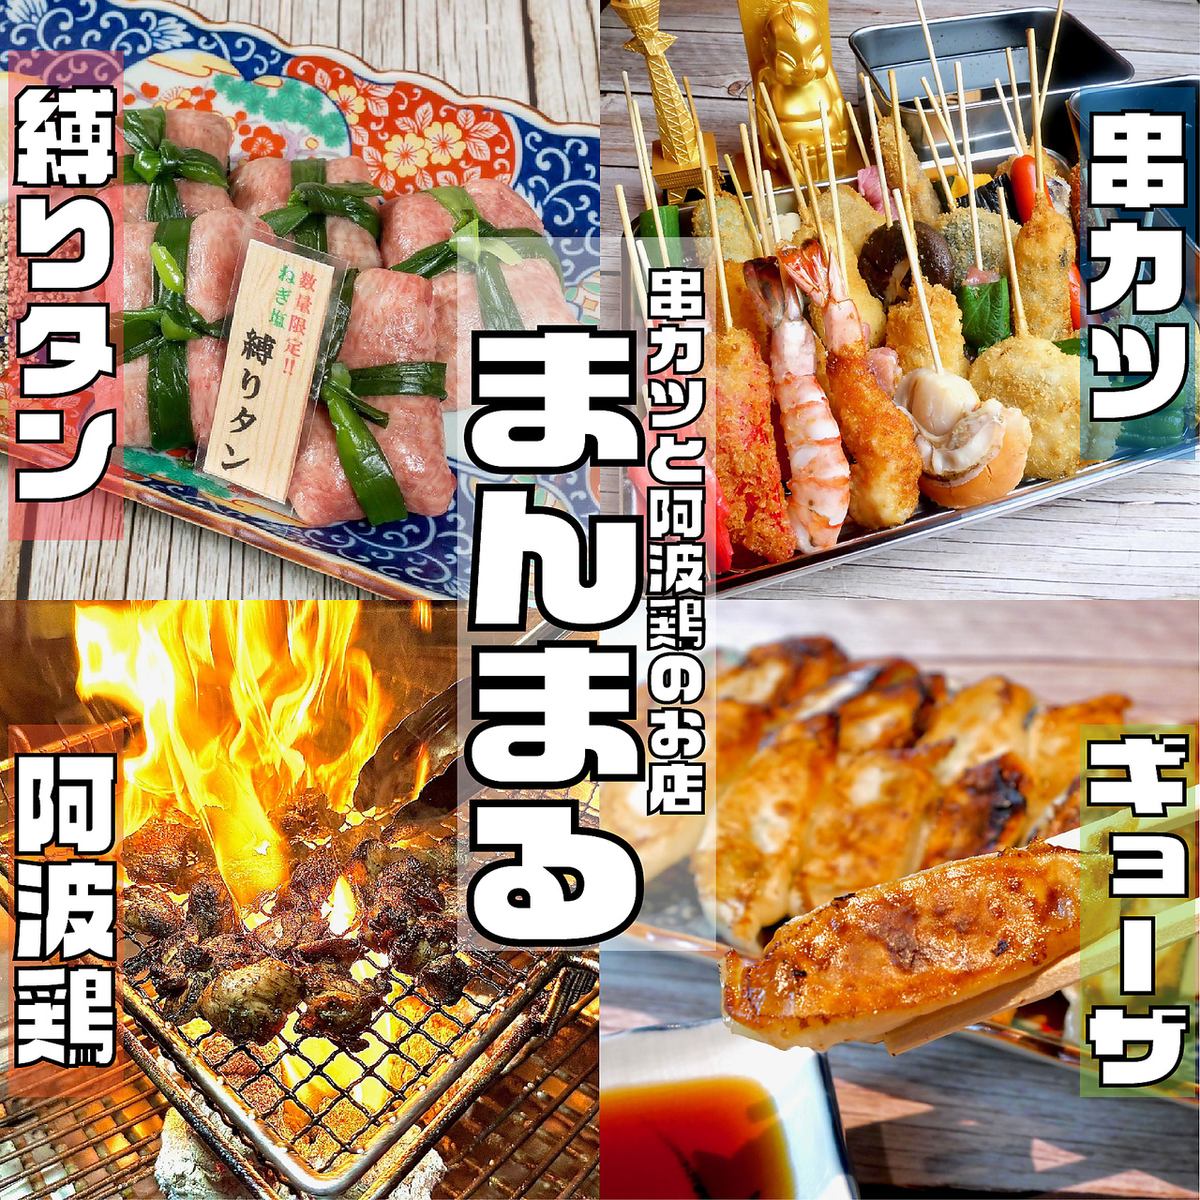 A cost-effective restaurant located in Akita-cho, downtown Tokushima, where you can enjoy charcoal-grilled chicken, meat sushi, and kushikatsu.